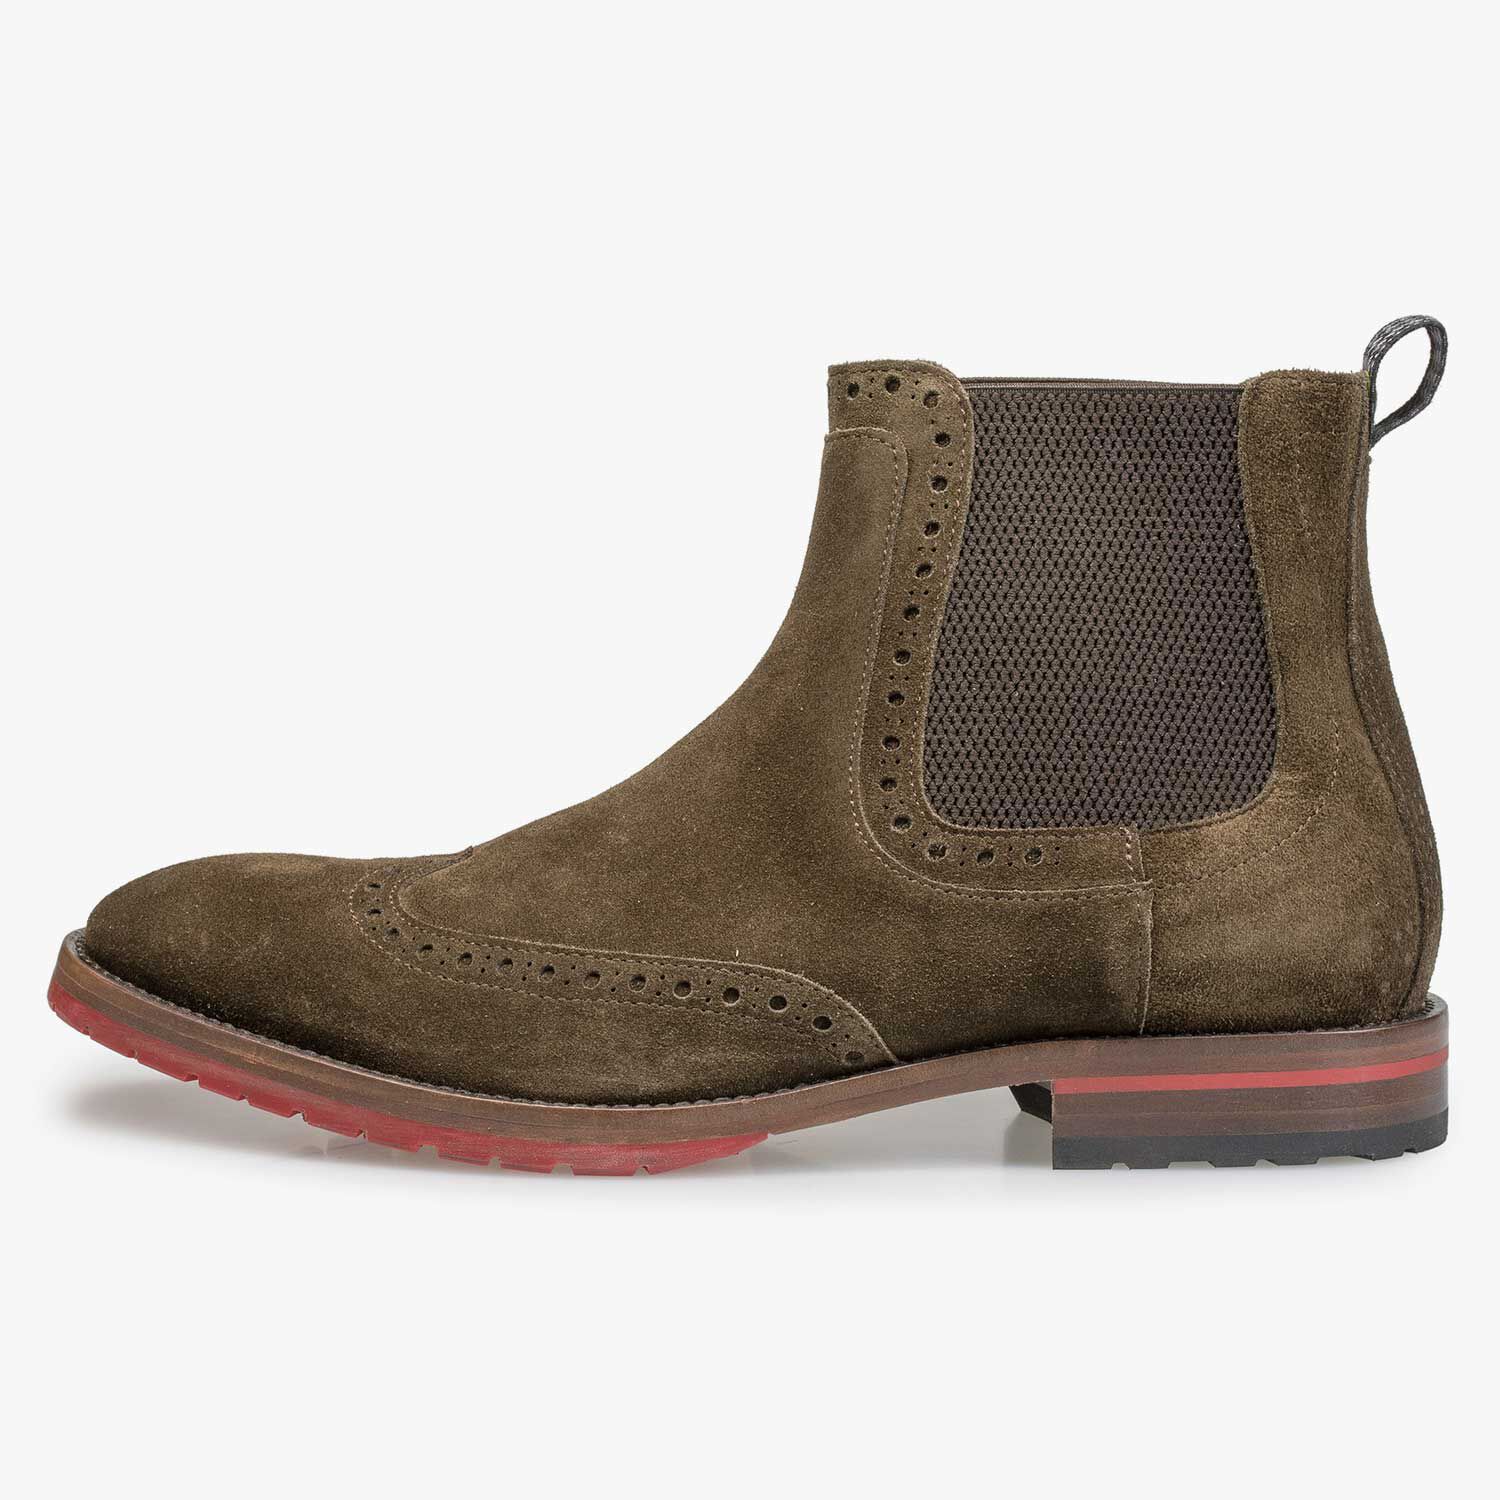 Calf suede leather Chelsea boot – olive green – 10329/05|Floris